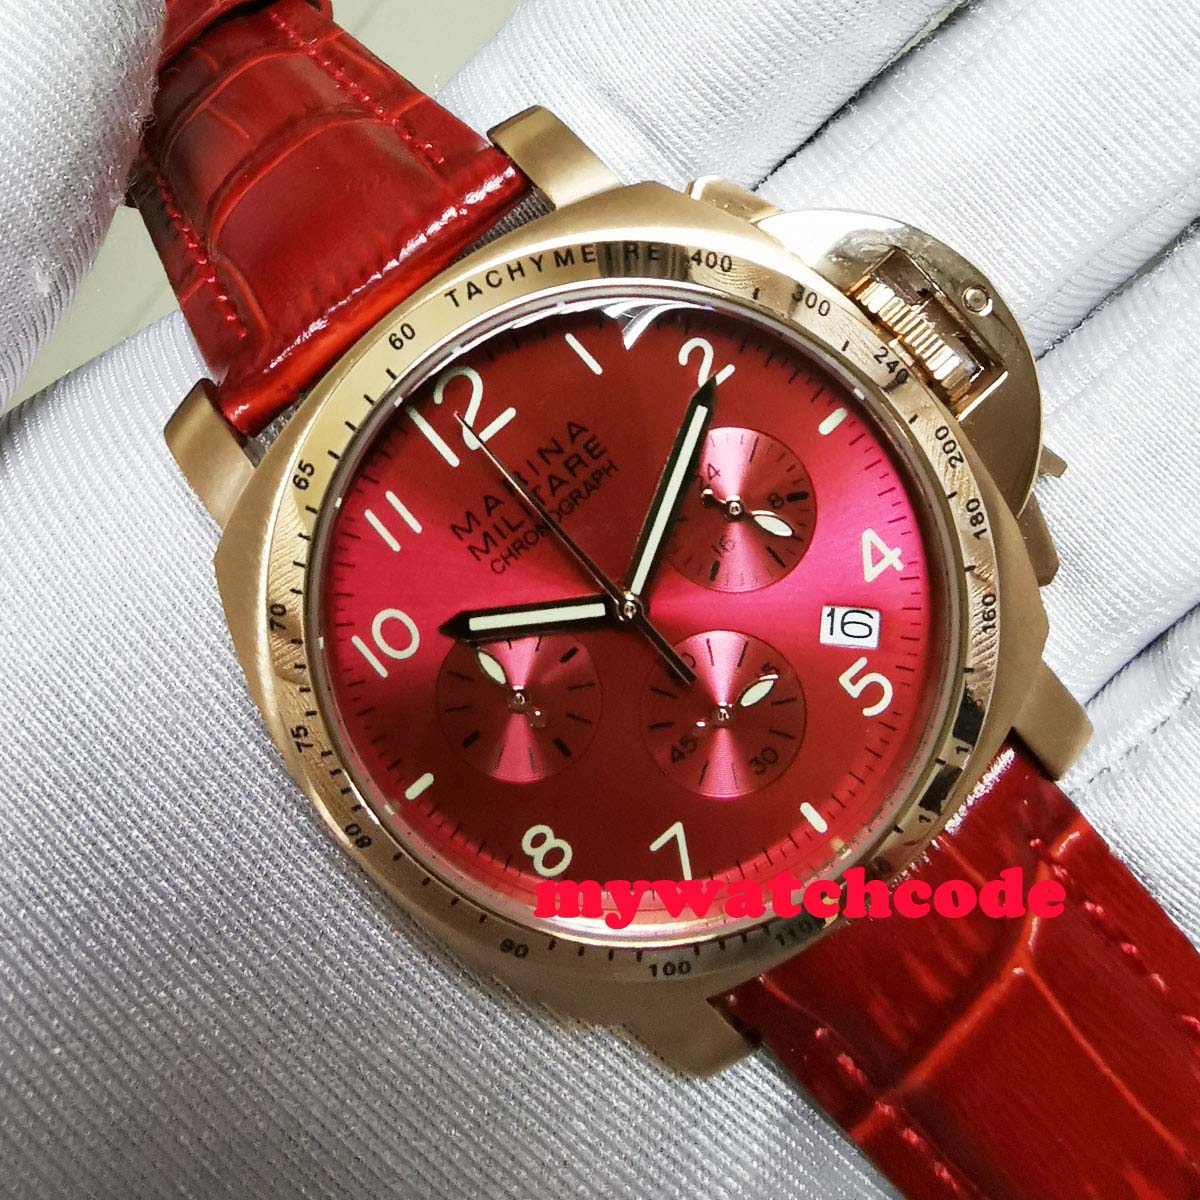 Big sale 40MM Red dial date quartz mens watch gold plated case full Chronograph